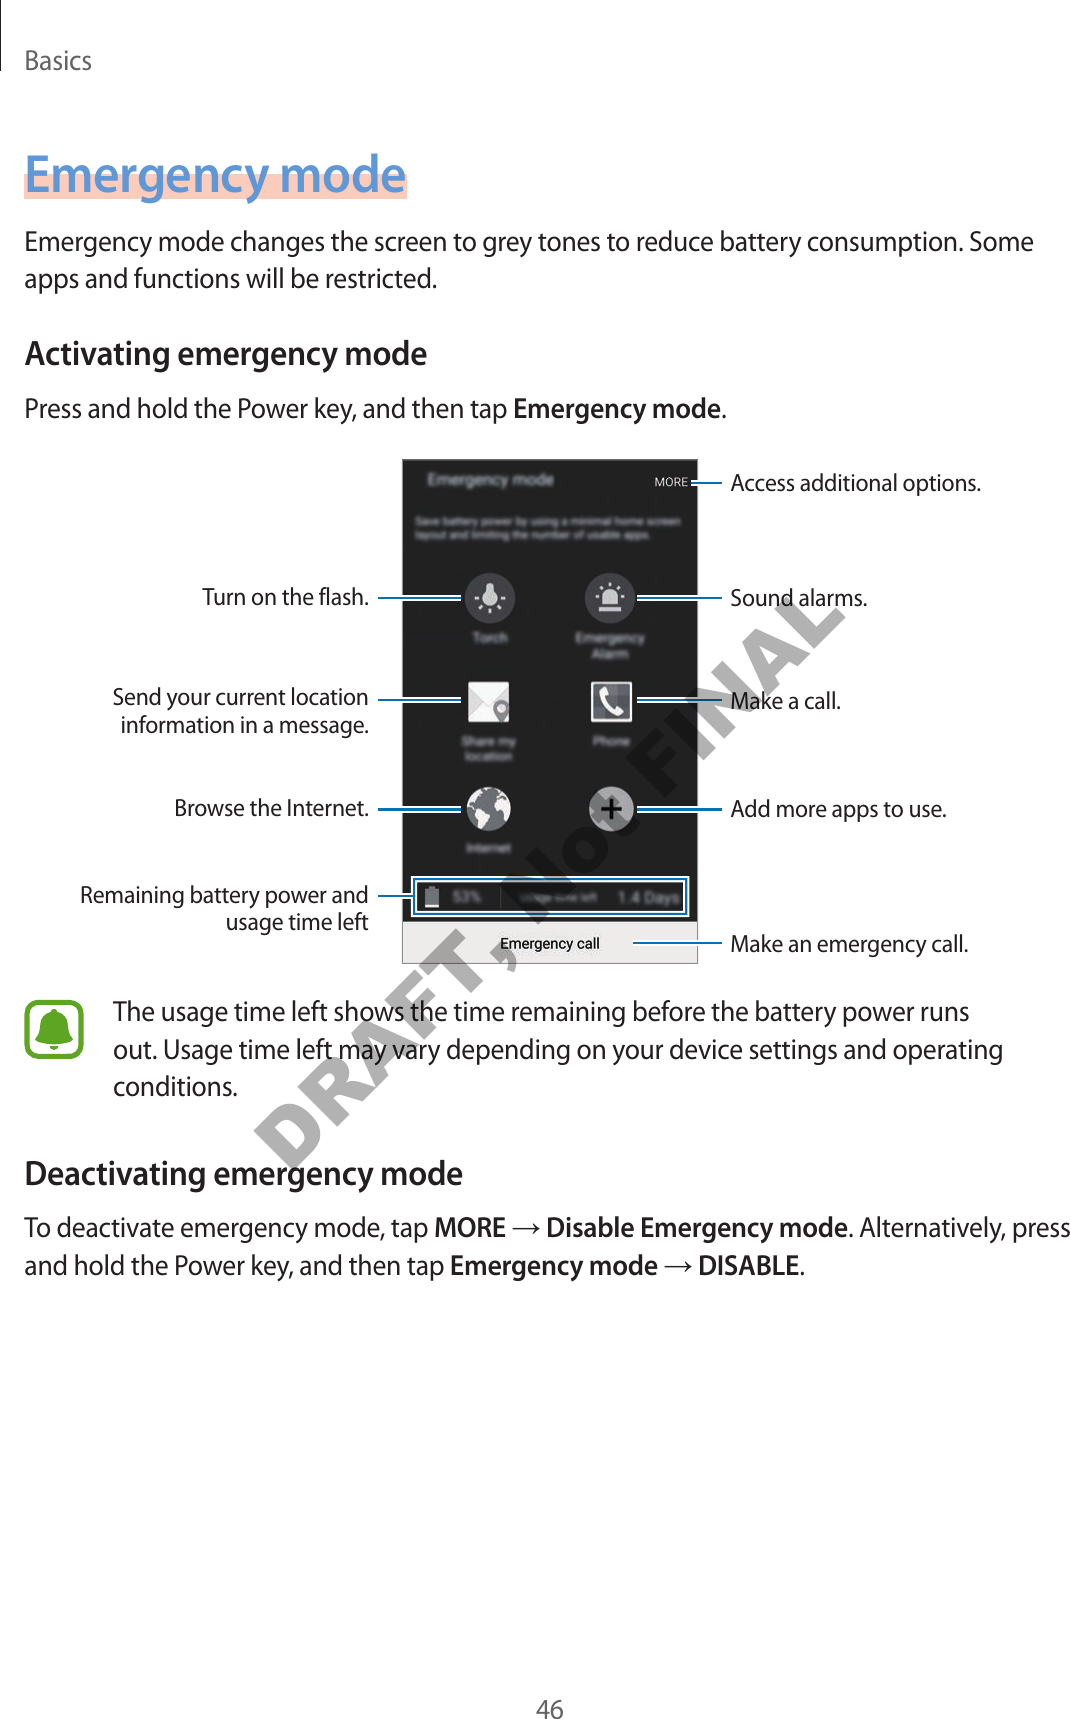 Basics46Emergency modeEmergency mode changes the screen to grey tones to reduce battery consumption. Some apps and functions will be restricted.Activating emergency modePress and hold the Power key, and then tap Emergency mode.Add more apps to use.Make an emergency call.Remaining battery power and usage time leftTurn on the flash.Make a call.Send your current location information in a message.Browse the Internet.Access additional options.Sound alarms.The usage time left shows the time remaining before the battery power runs out. Usage time left may vary depending on your device settings and operating conditions.Deactivating emergency modeTo deactivate emergency mode, tap MORE → Disable Emergency mode. Alternatively, press and hold the Power key, and then tap Emergency mode → DISABLE.DRAFT, Not FINAL